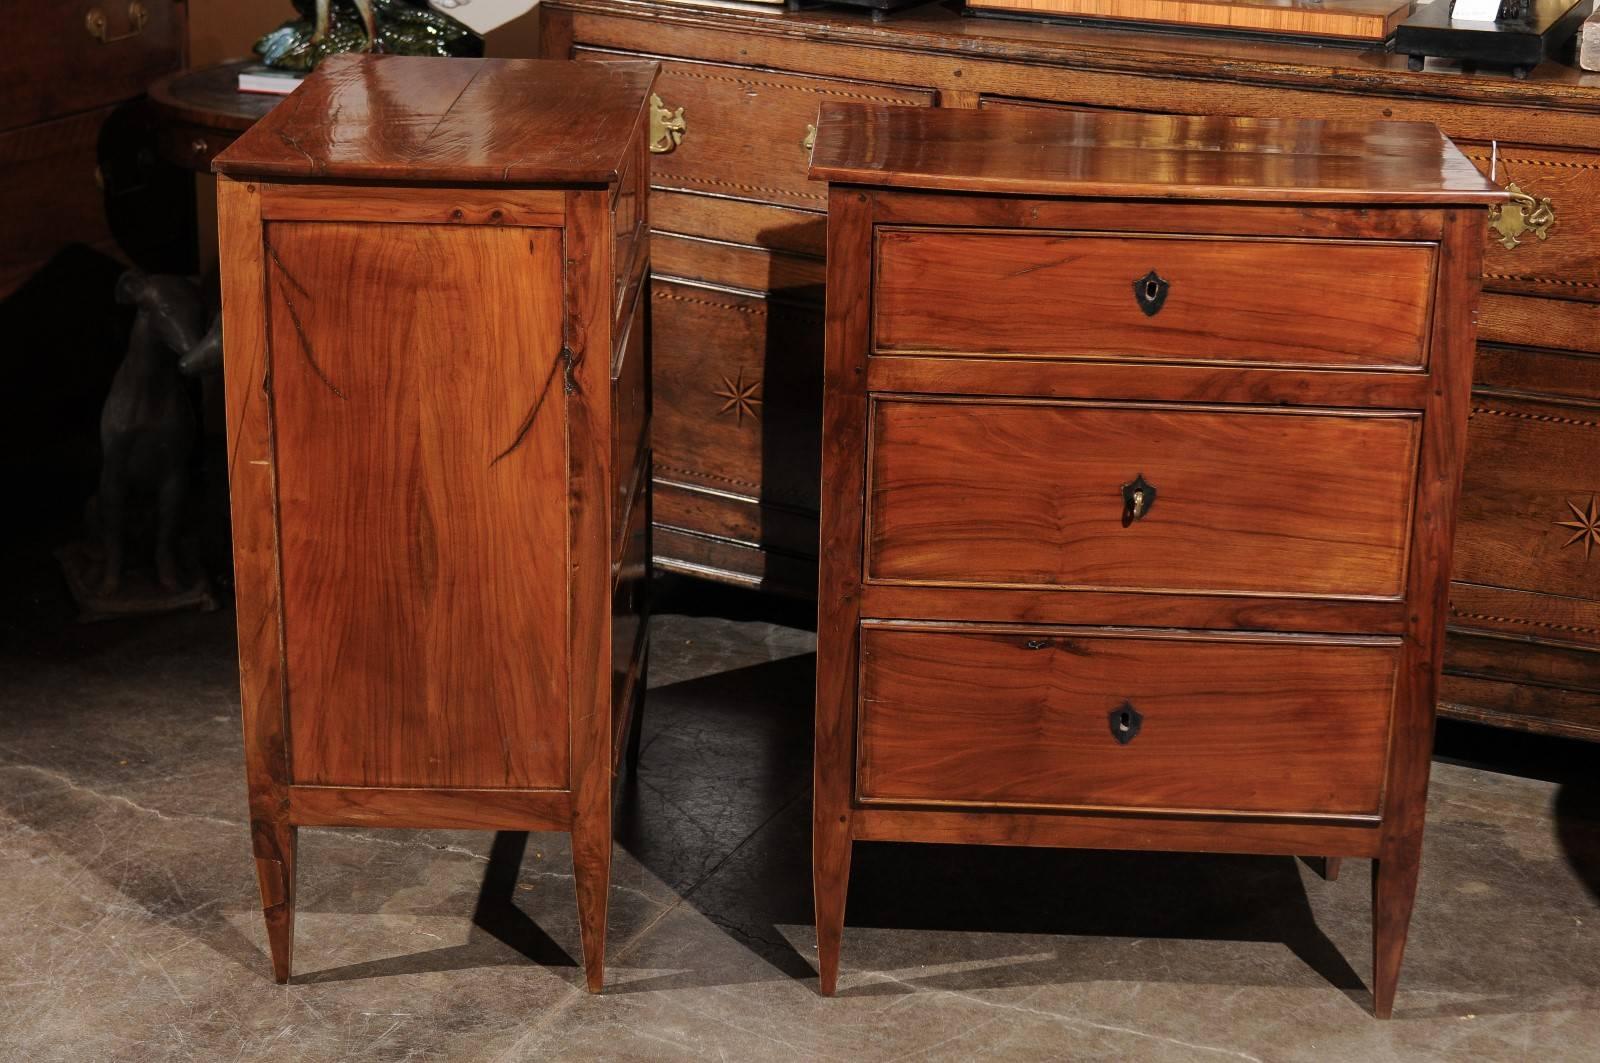 20th Century Pair of French Directoire Style Small Size Cherry Commodes from the 1920s